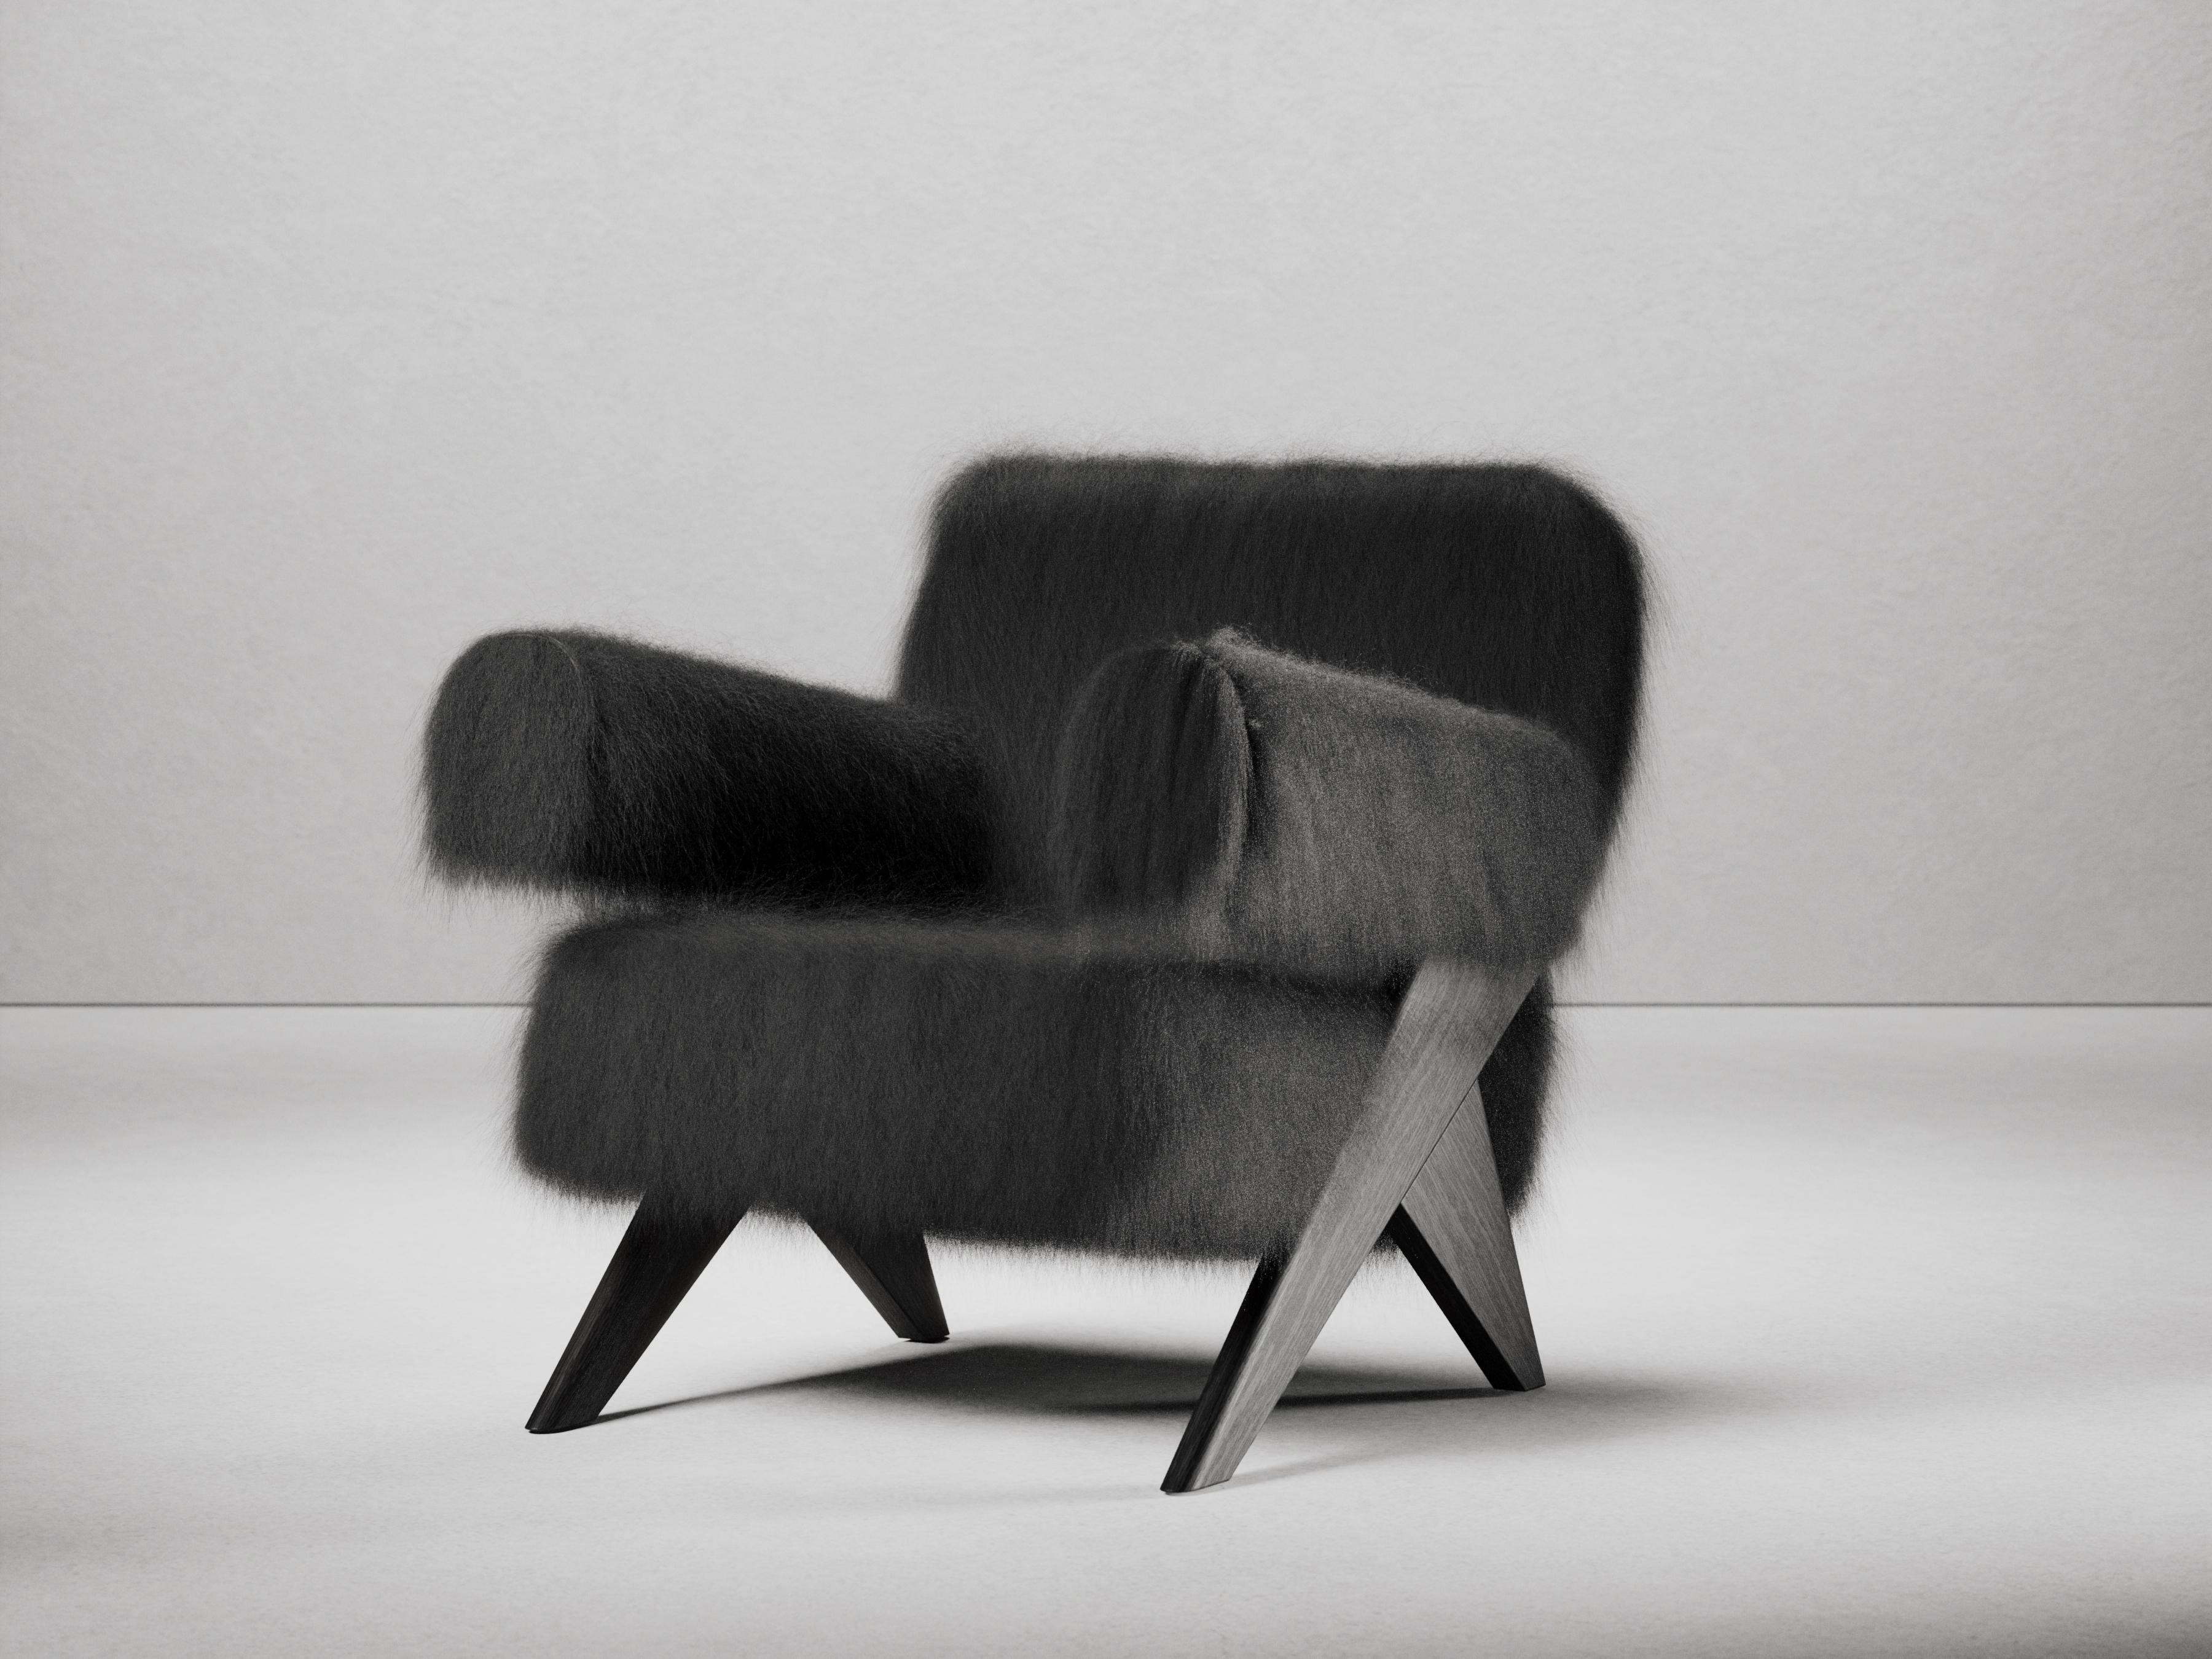 Mongolian Fur Souvenir Armchair by Gio Pagani
Dimensions: D 77 x W 69 x H 75 cm. SH: 38 cm.
Materials: Black elm wood and Mongolian fur. 

In a fluid society capable of mixing infinite social and cultural varieties, the nostalgic search for reworked